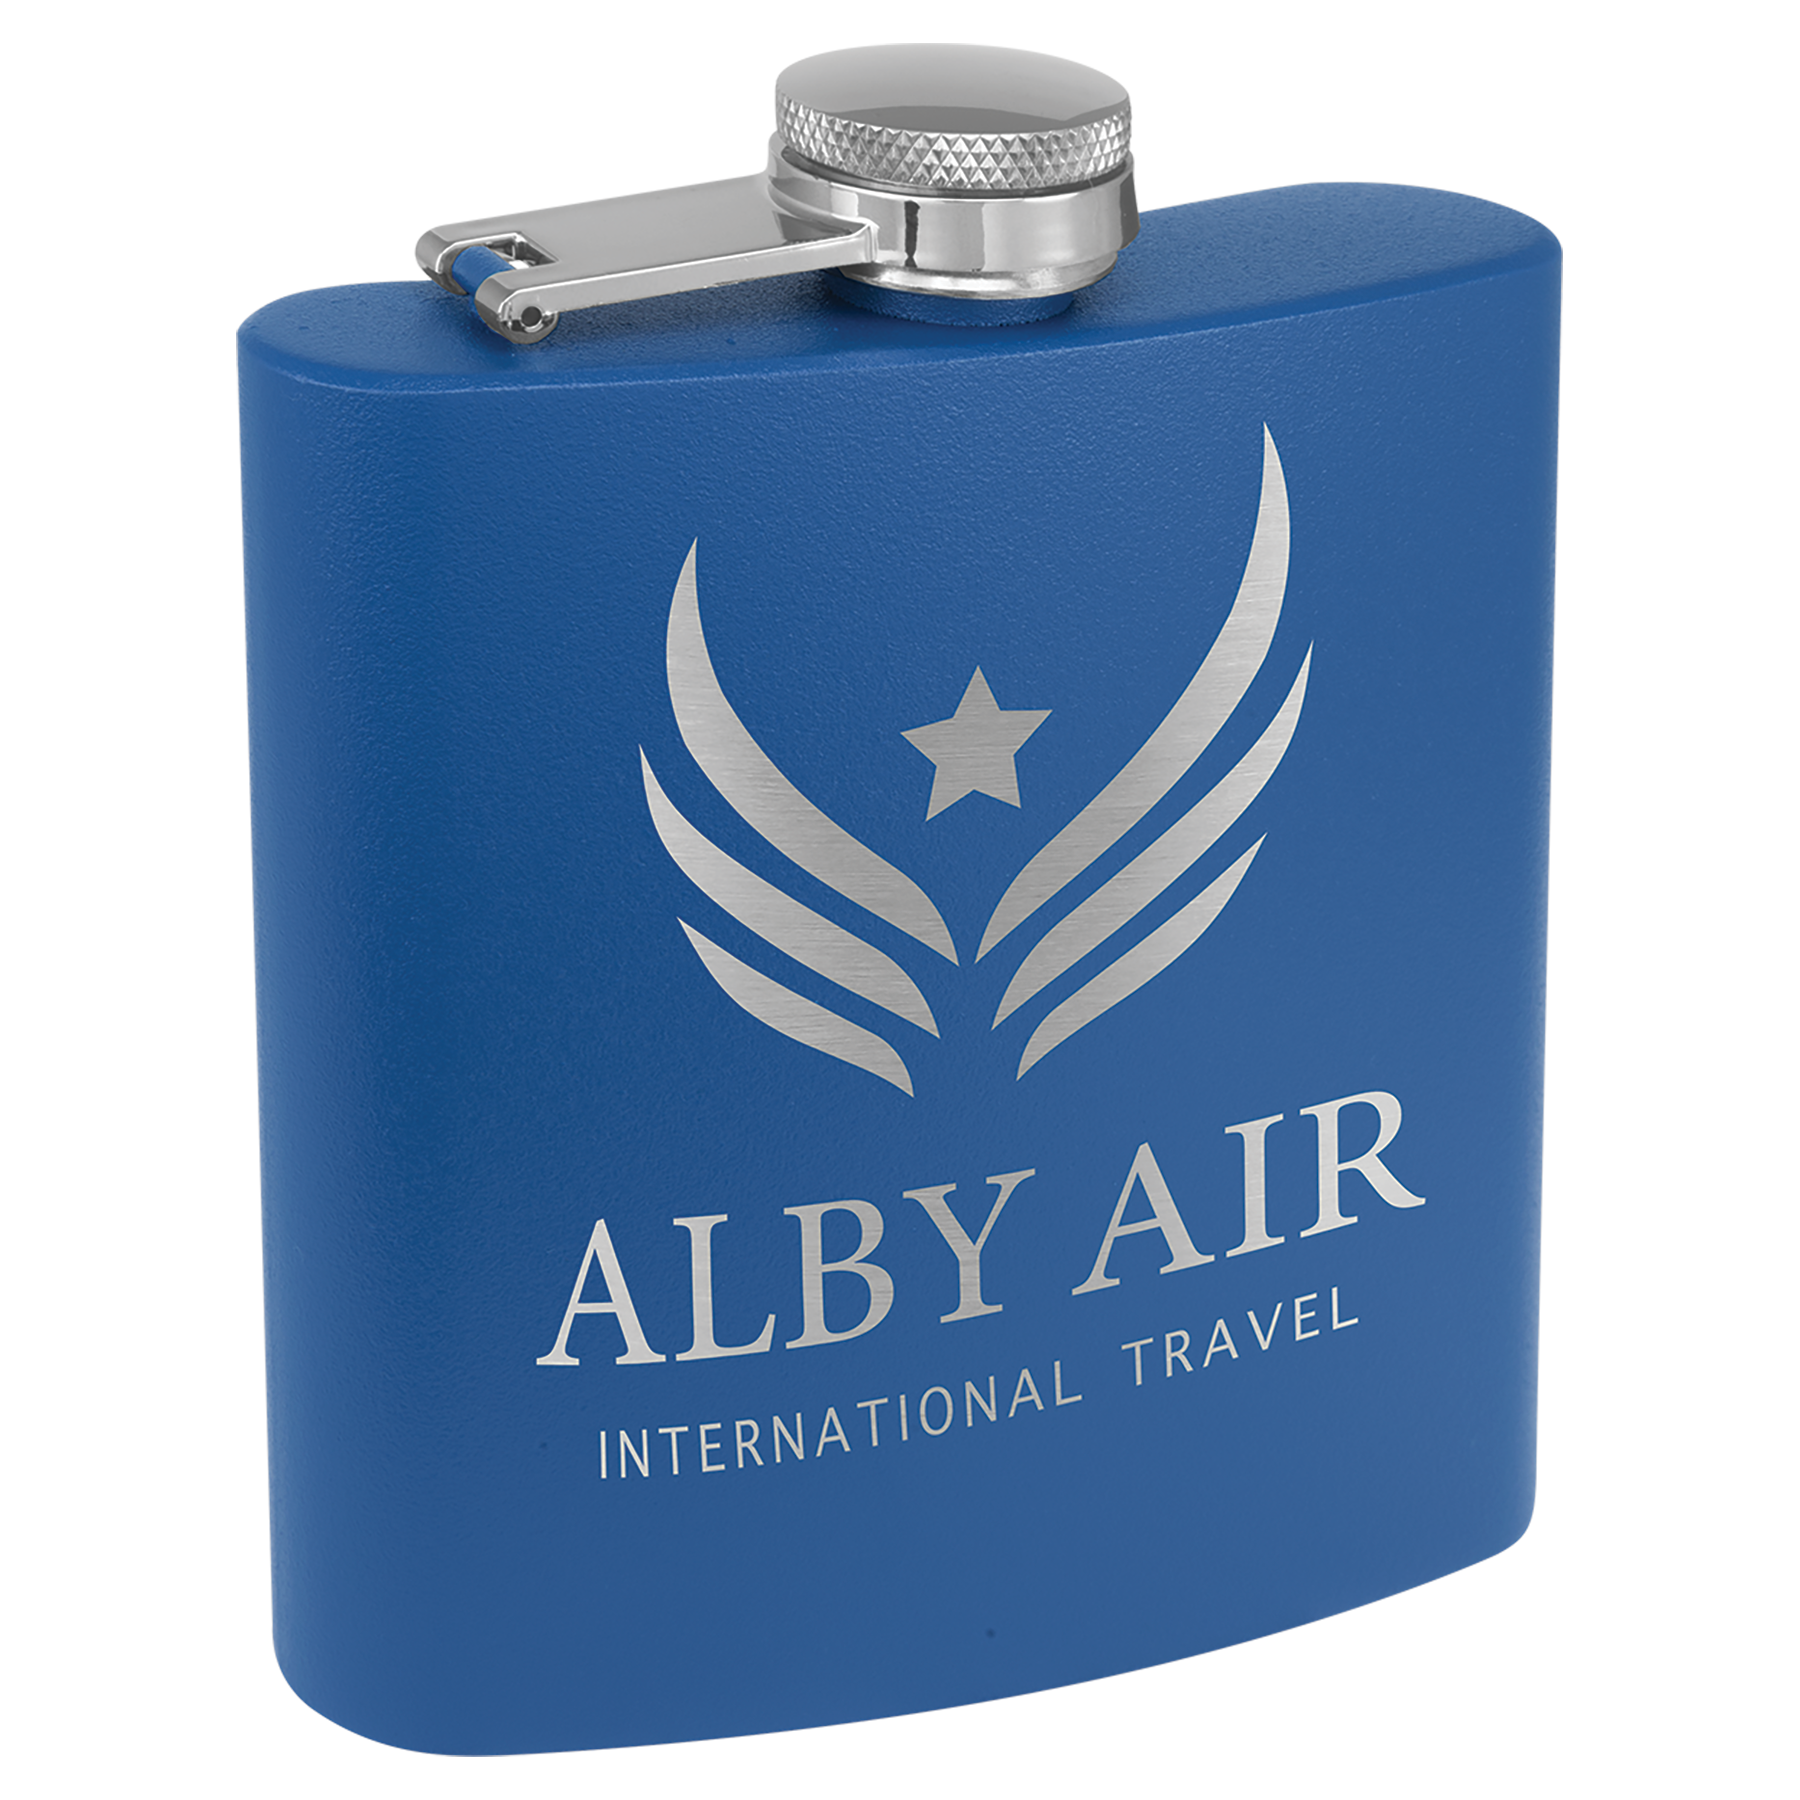 6 oz. Powder Coated Stainless Steel Flask